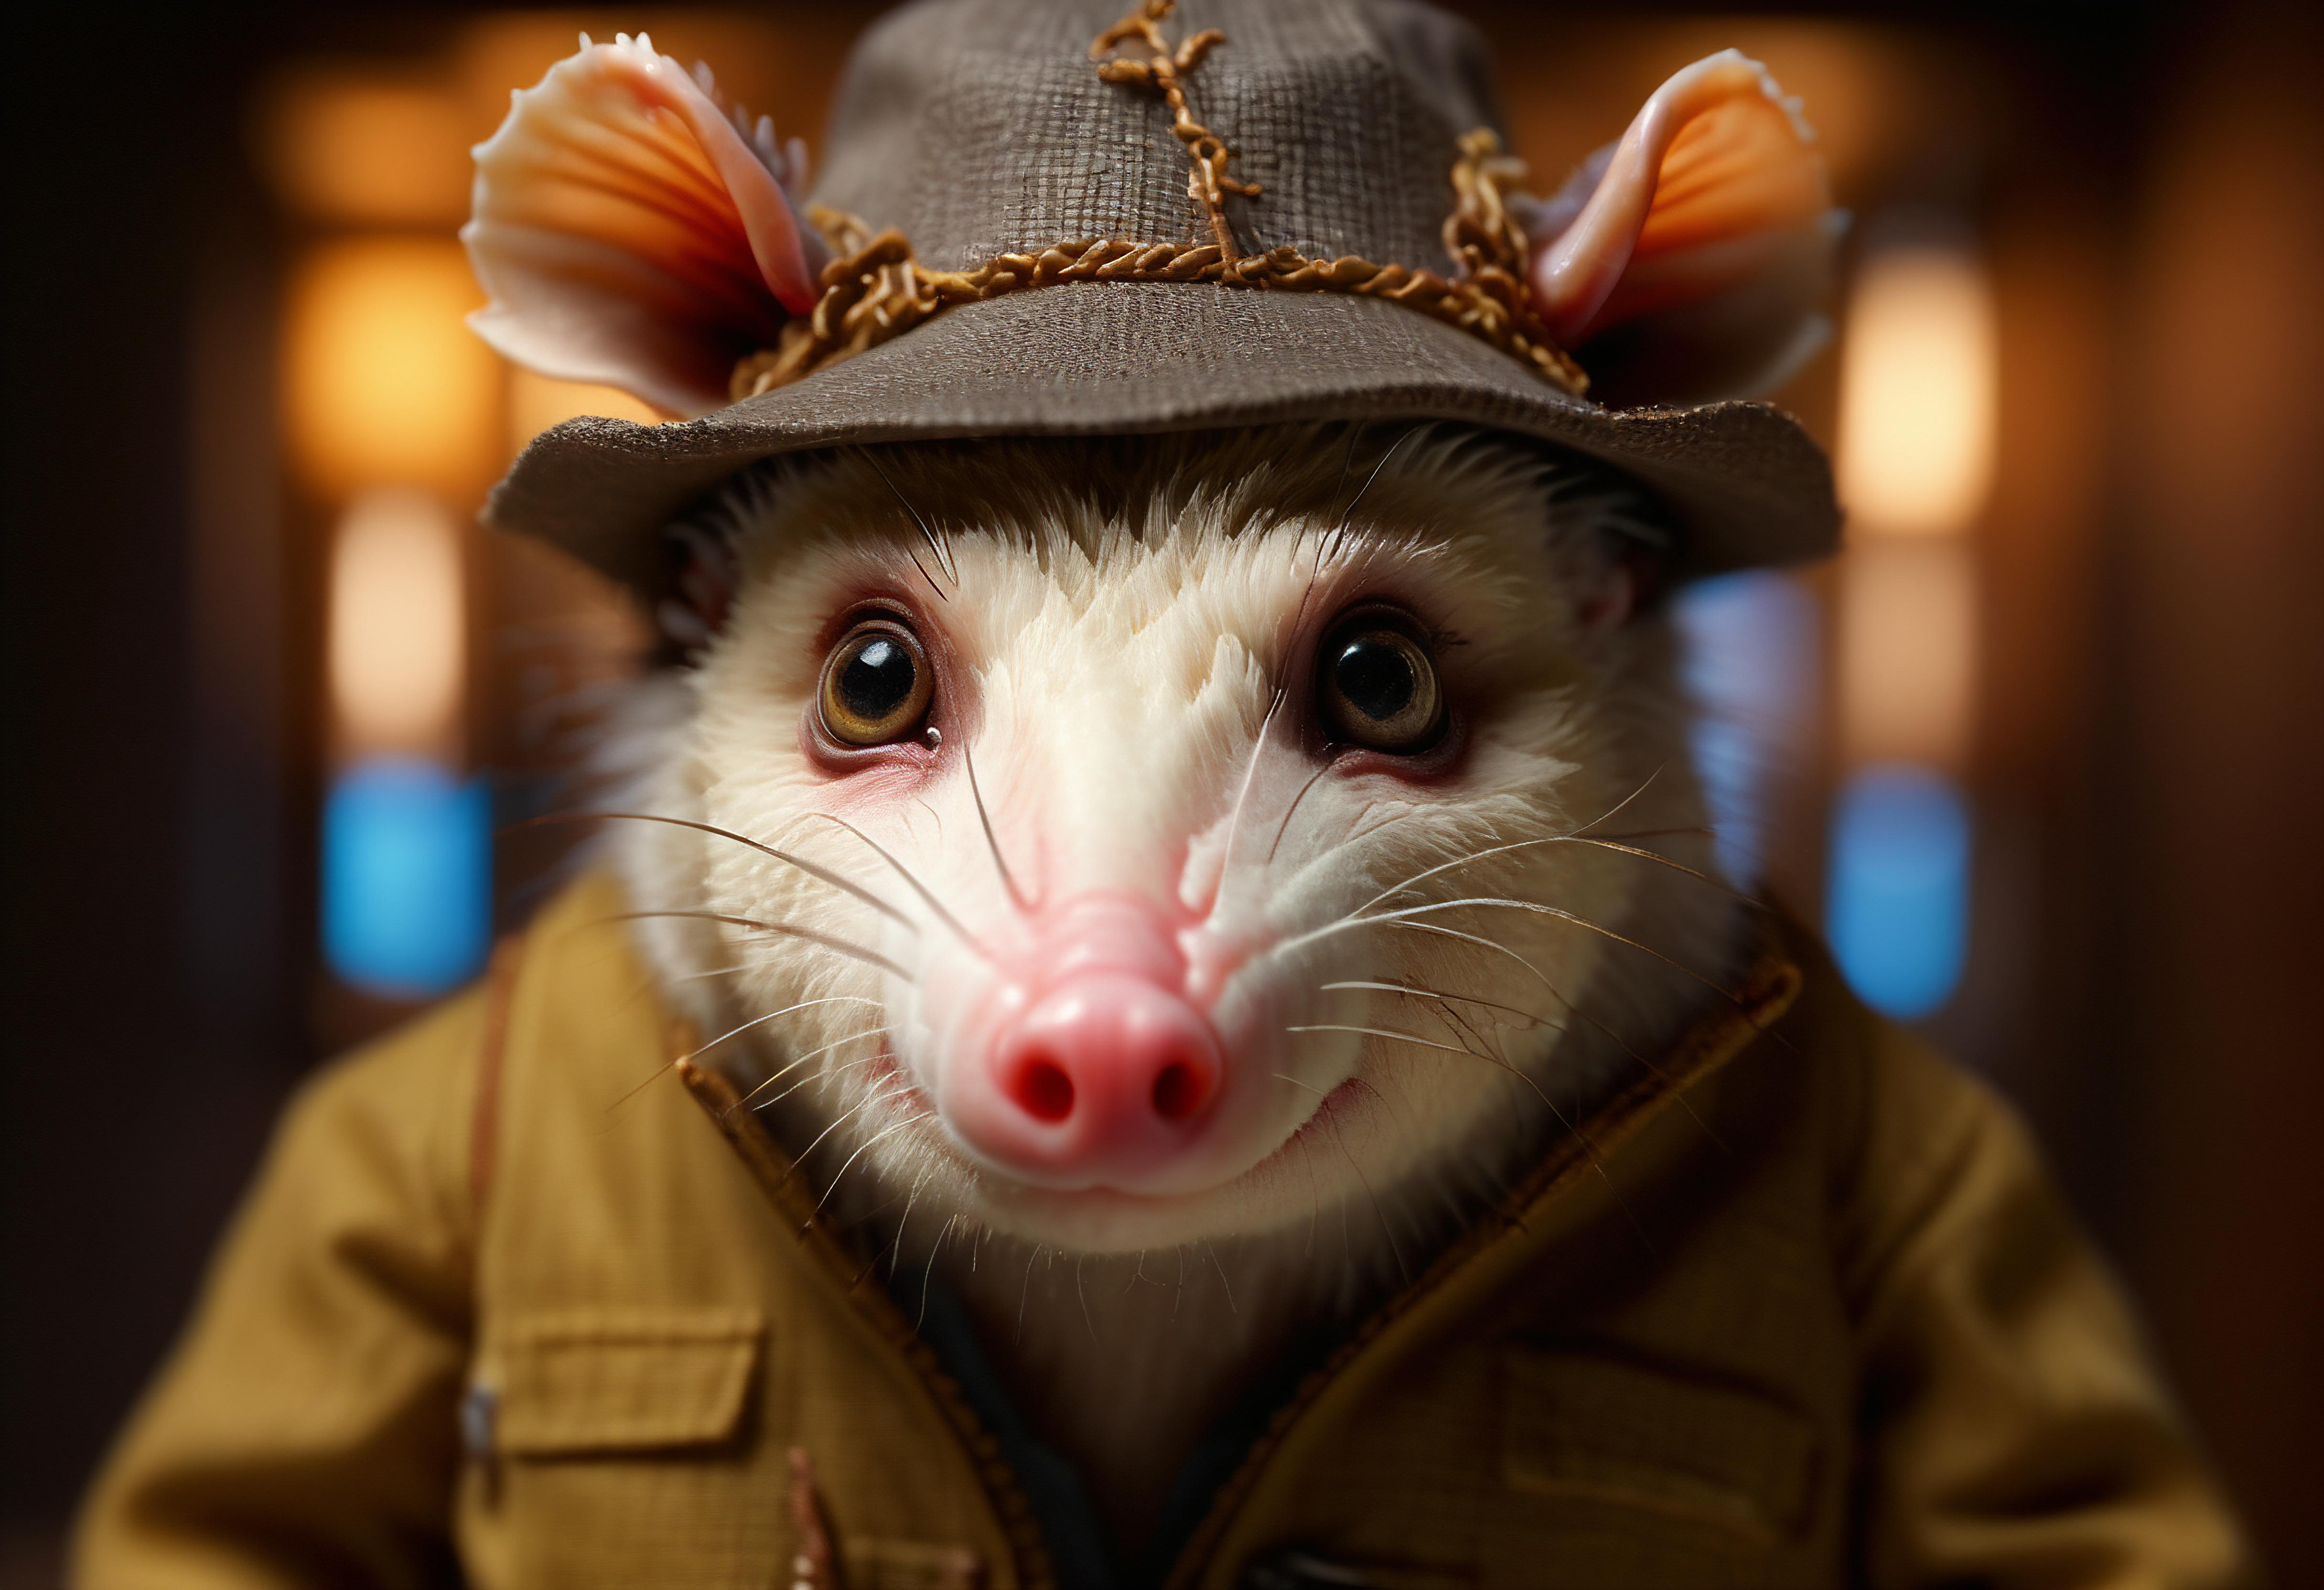 Better Opossums image by zxbc